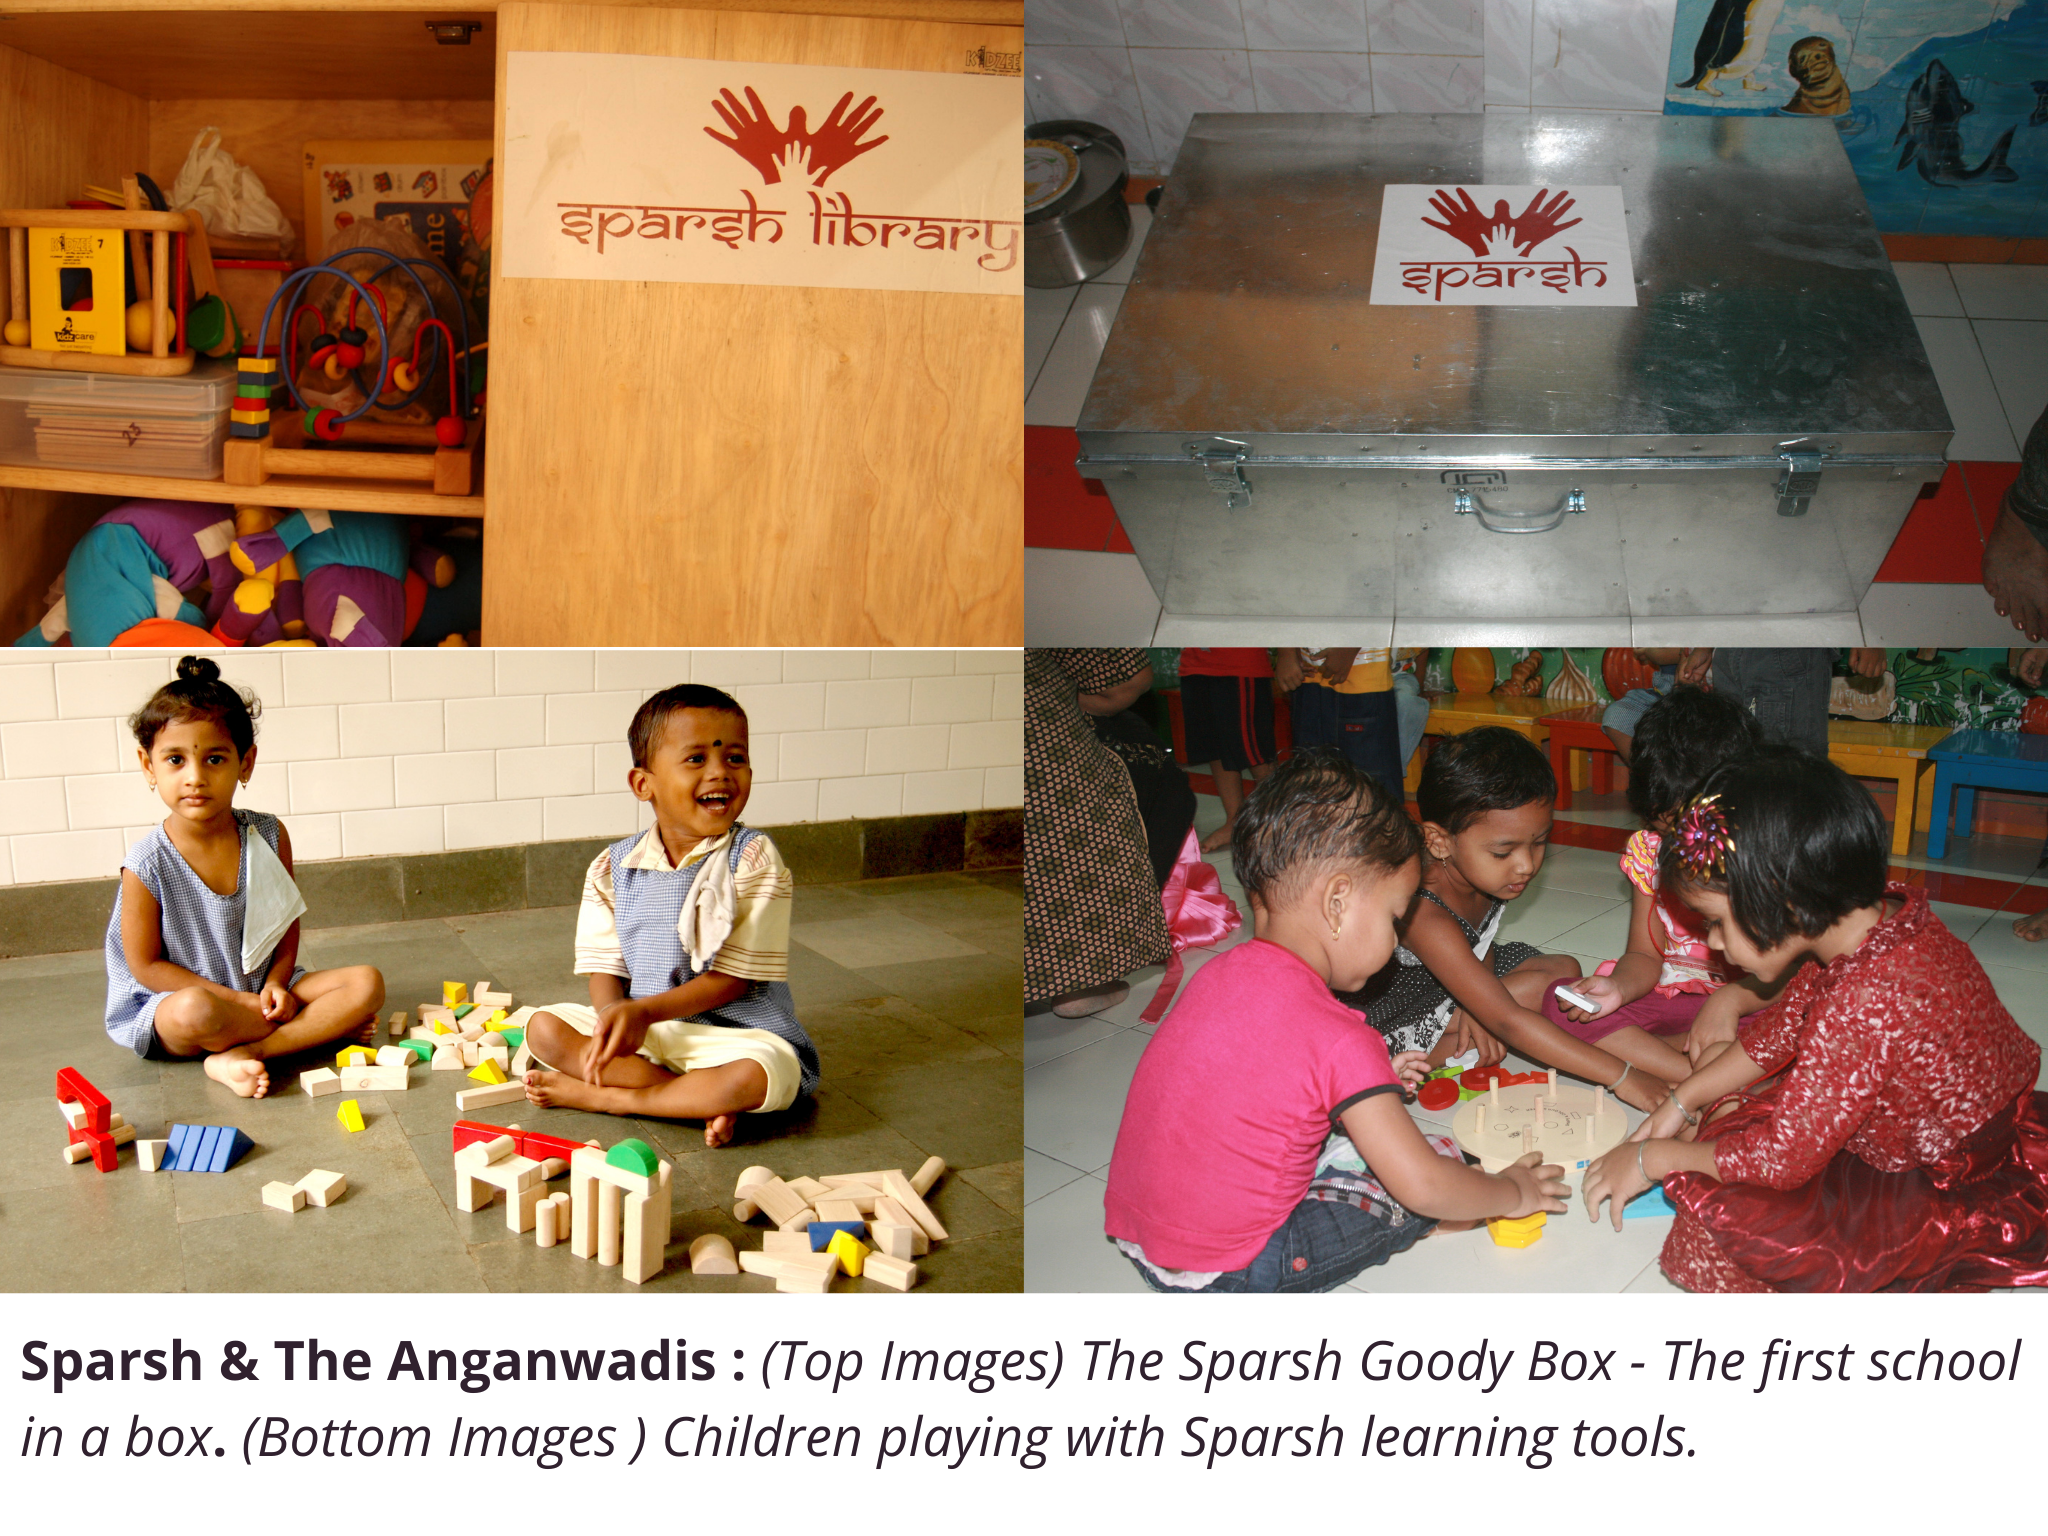 Children Playing with sparsh learning tools